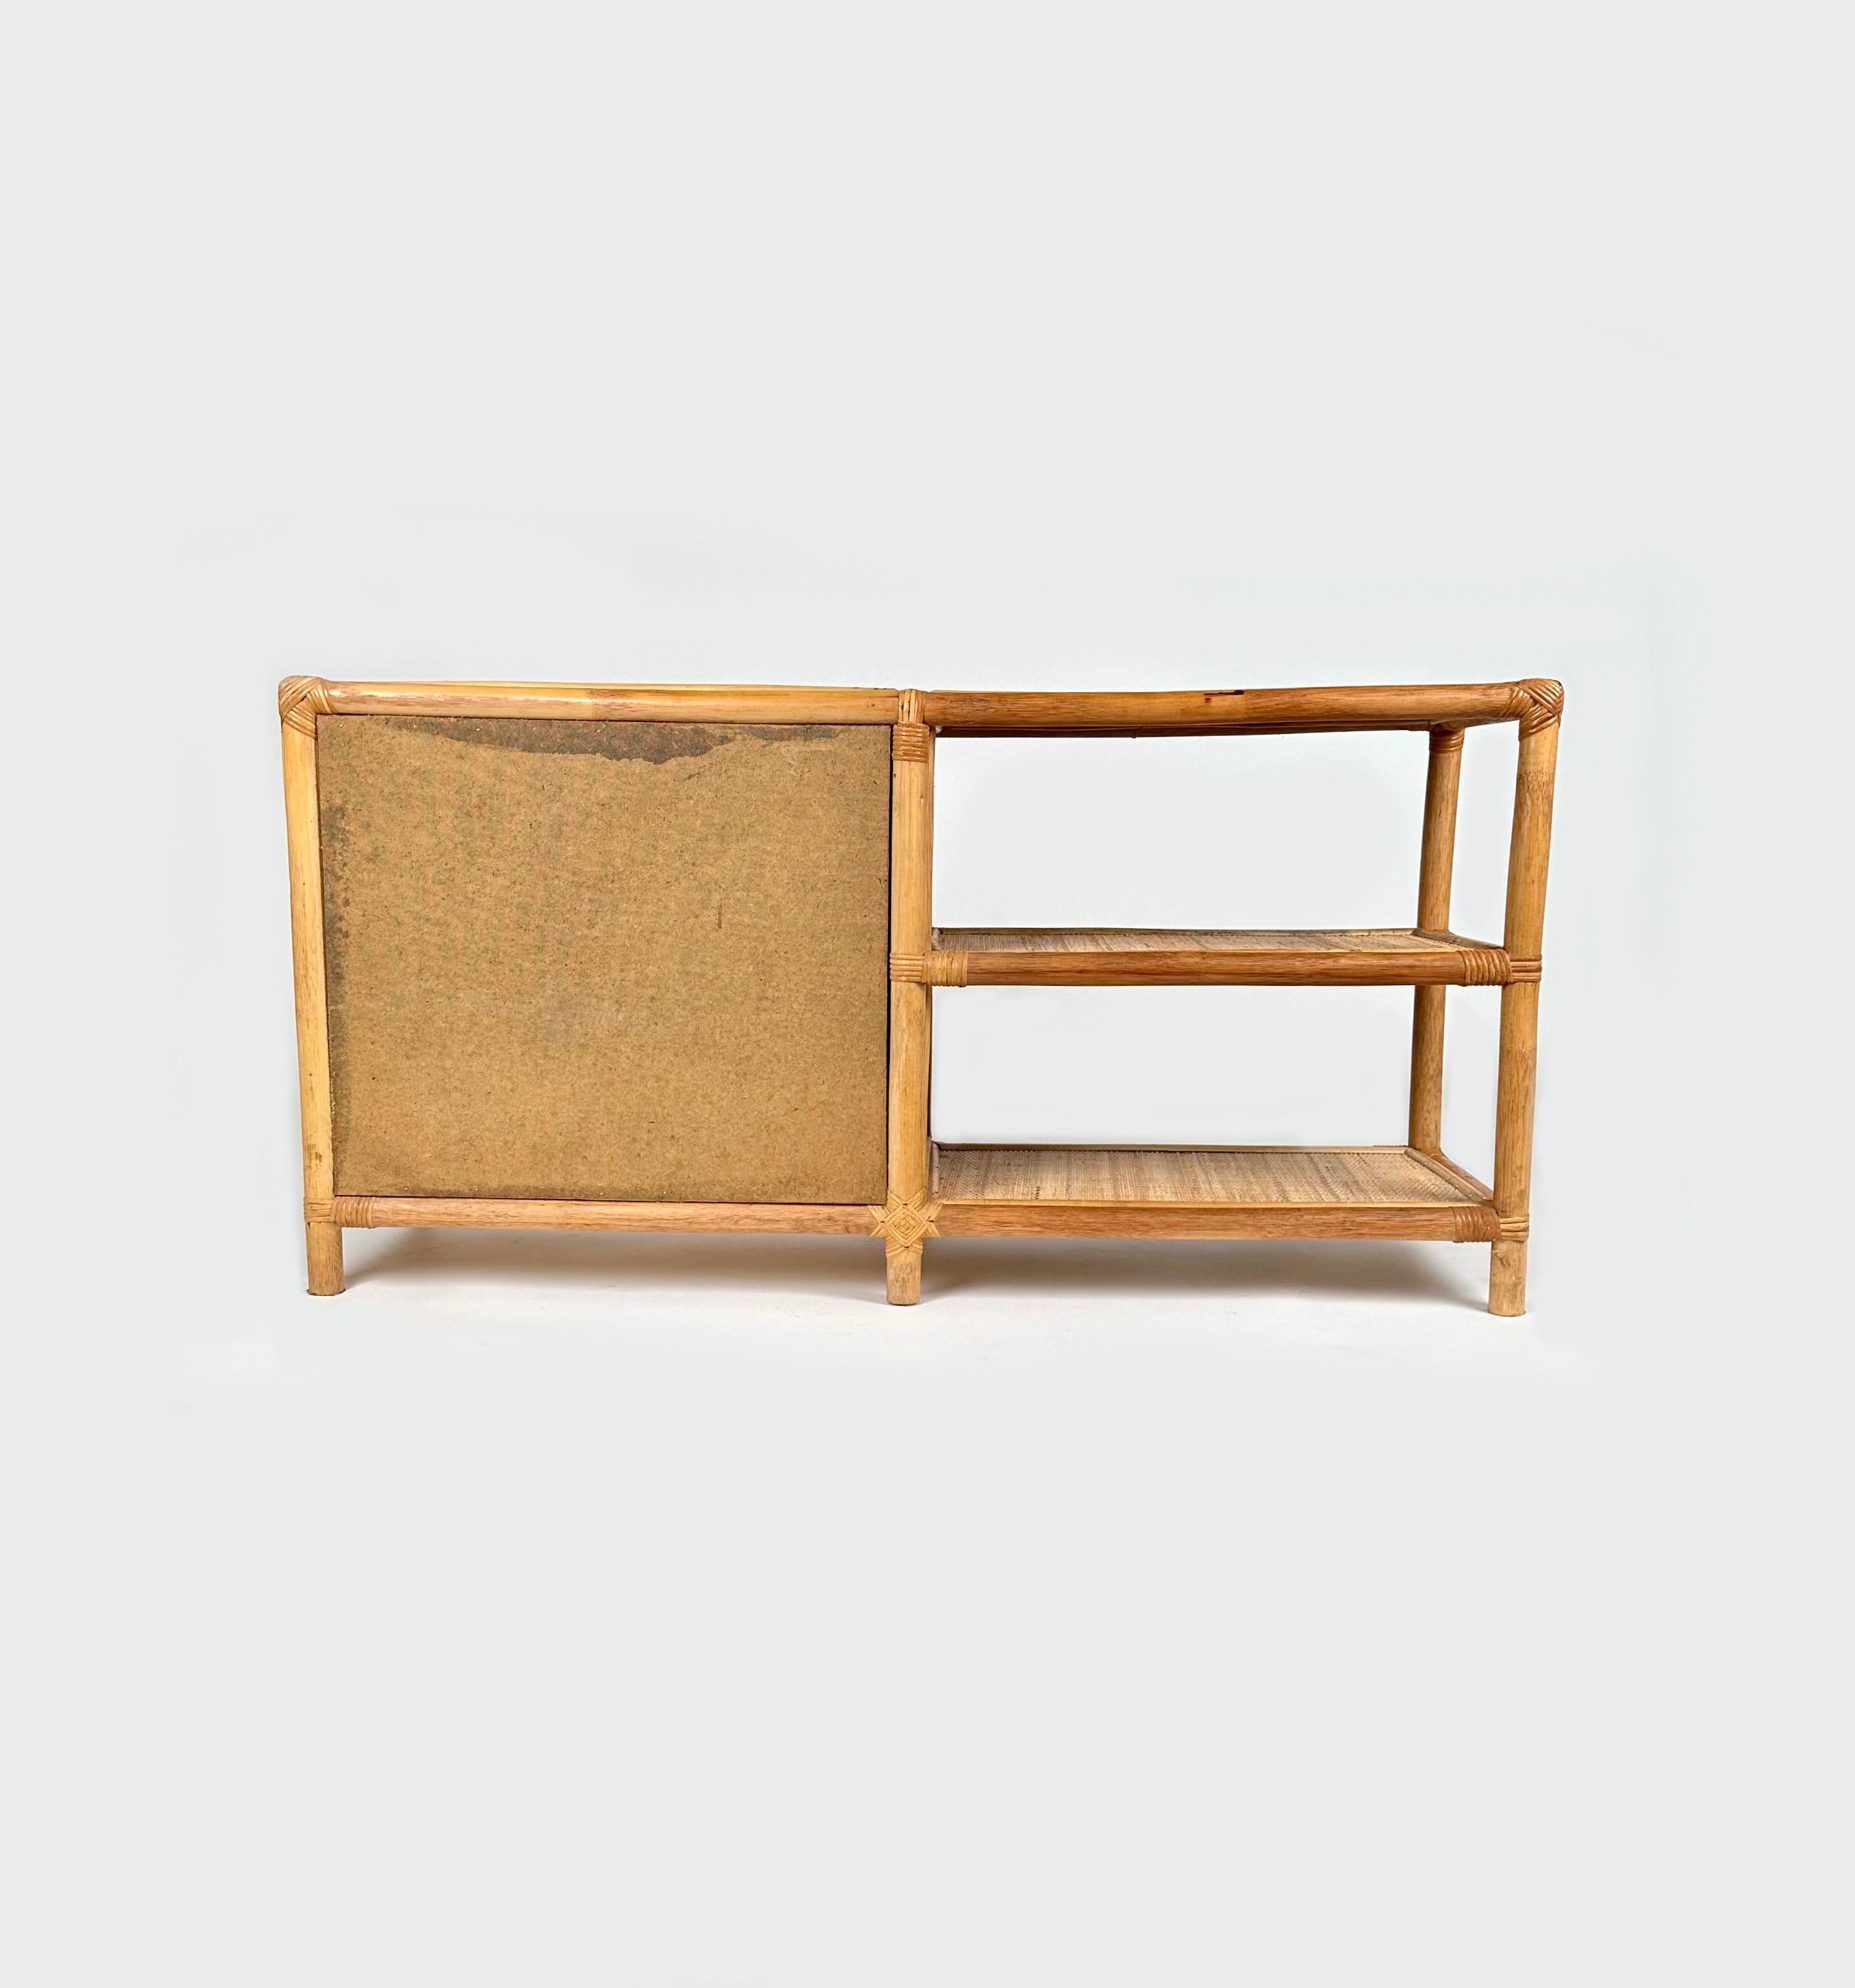 Midcentury Bamboo and Rattan Cabinet Sideboard whit Drawers, Italy 1970s For Sale 3